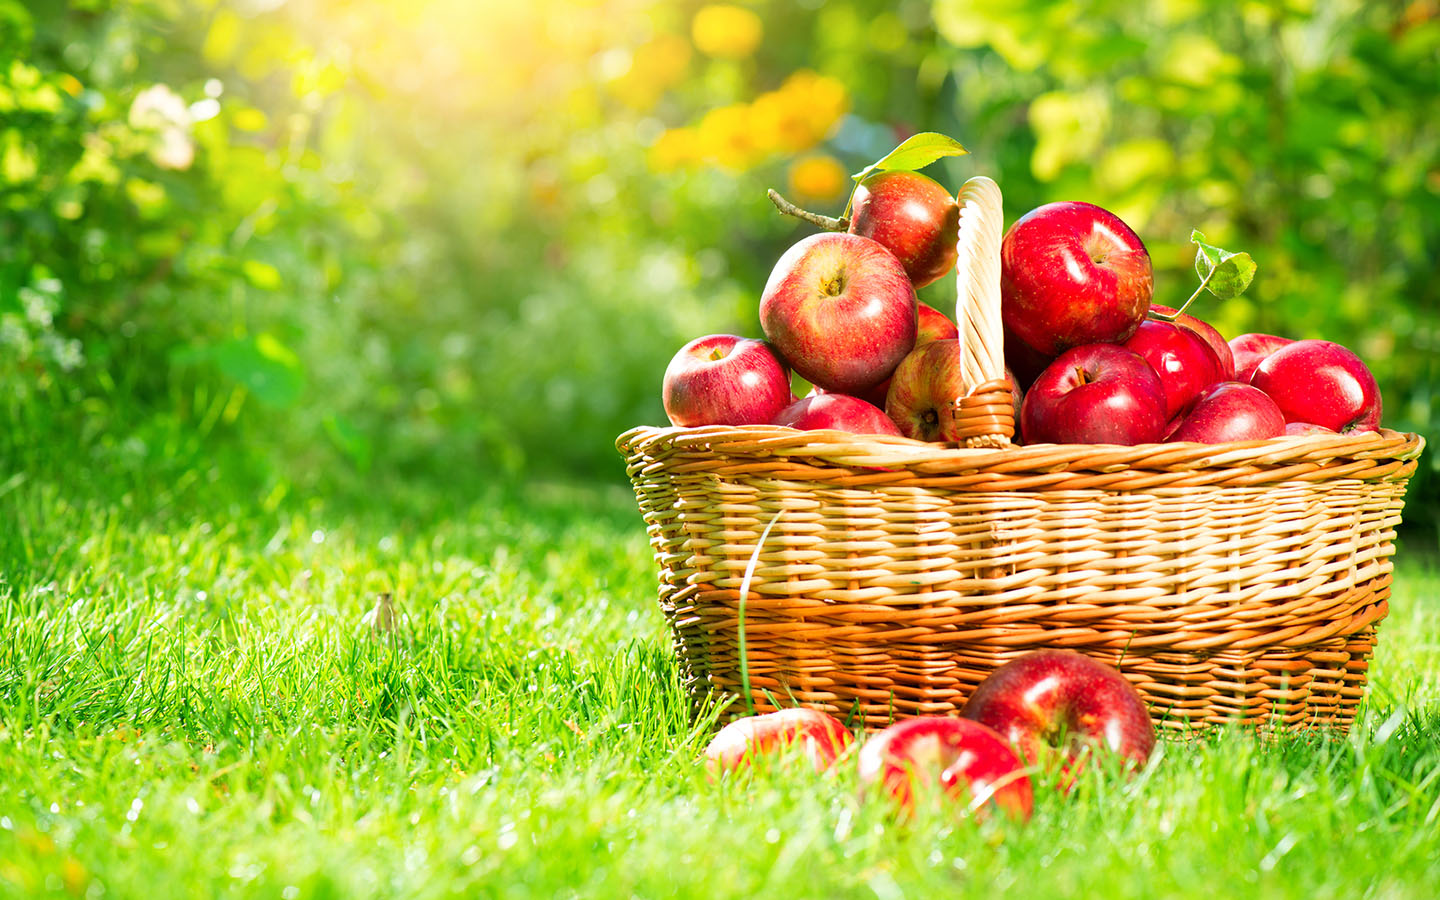 Basket of apples in the grass